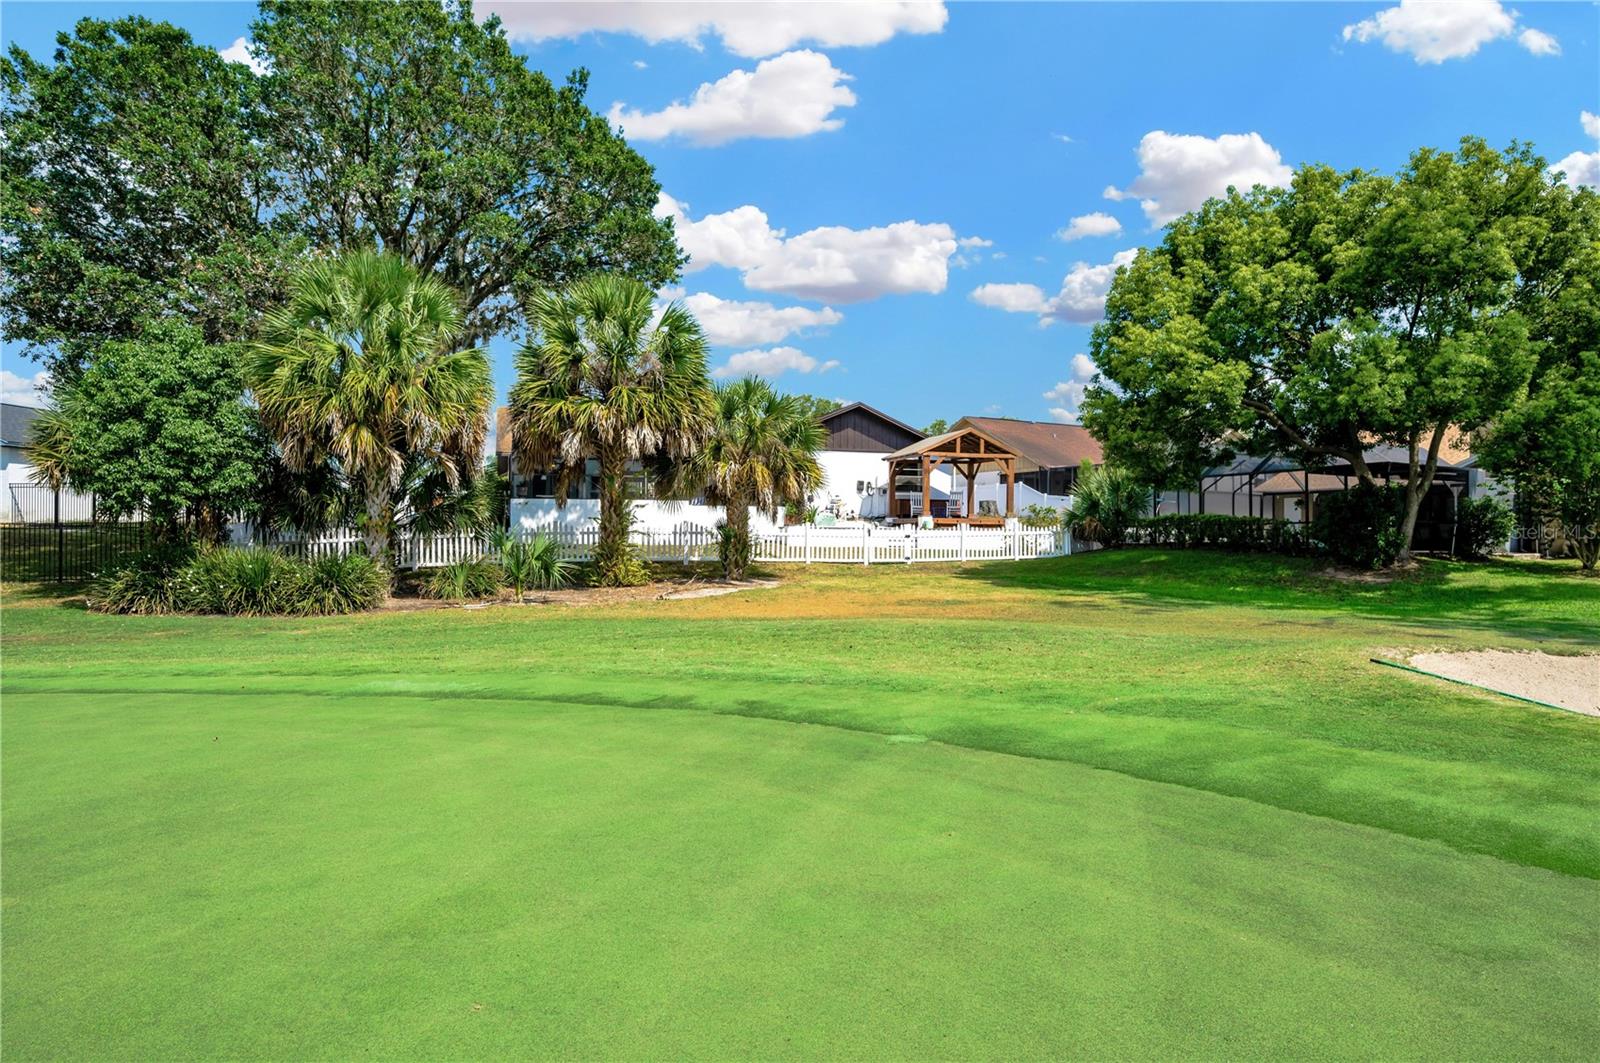 Coveted golf course location!